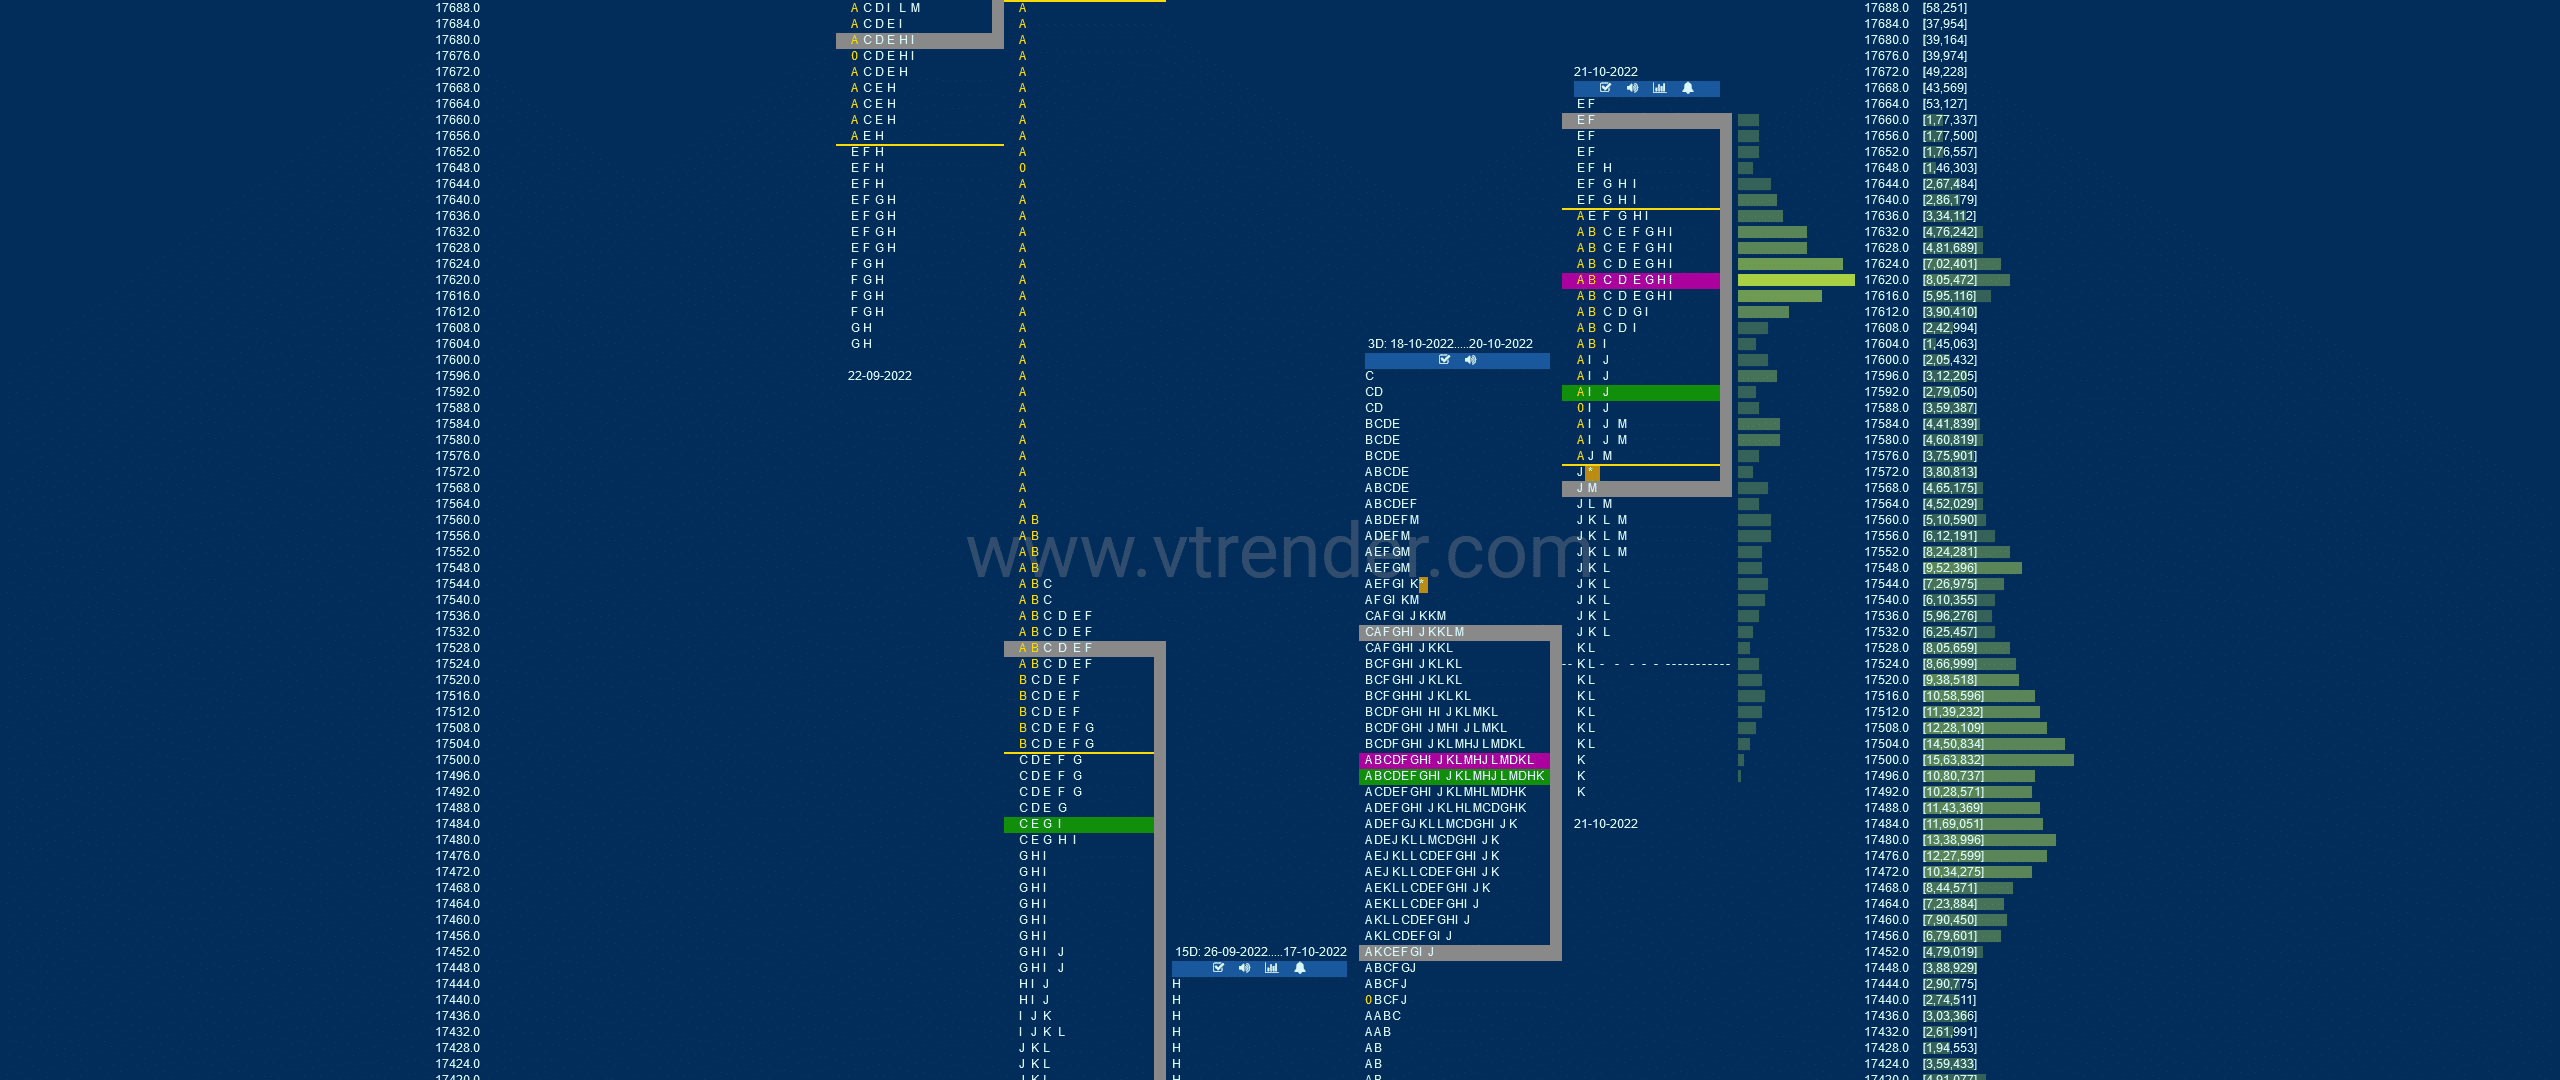 Nf 14 Market Profile Analysis Dated 21St Oct 2022 Banknifty Futures, Charts, Day Trading, Intraday Trading, Intraday Trading Strategies, Market Profile, Market Profile Trading Strategies, Nifty Futures, Order Flow Analysis, Support And Resistance, Technical Analysis, Trading Strategies, Volume Profile Trading